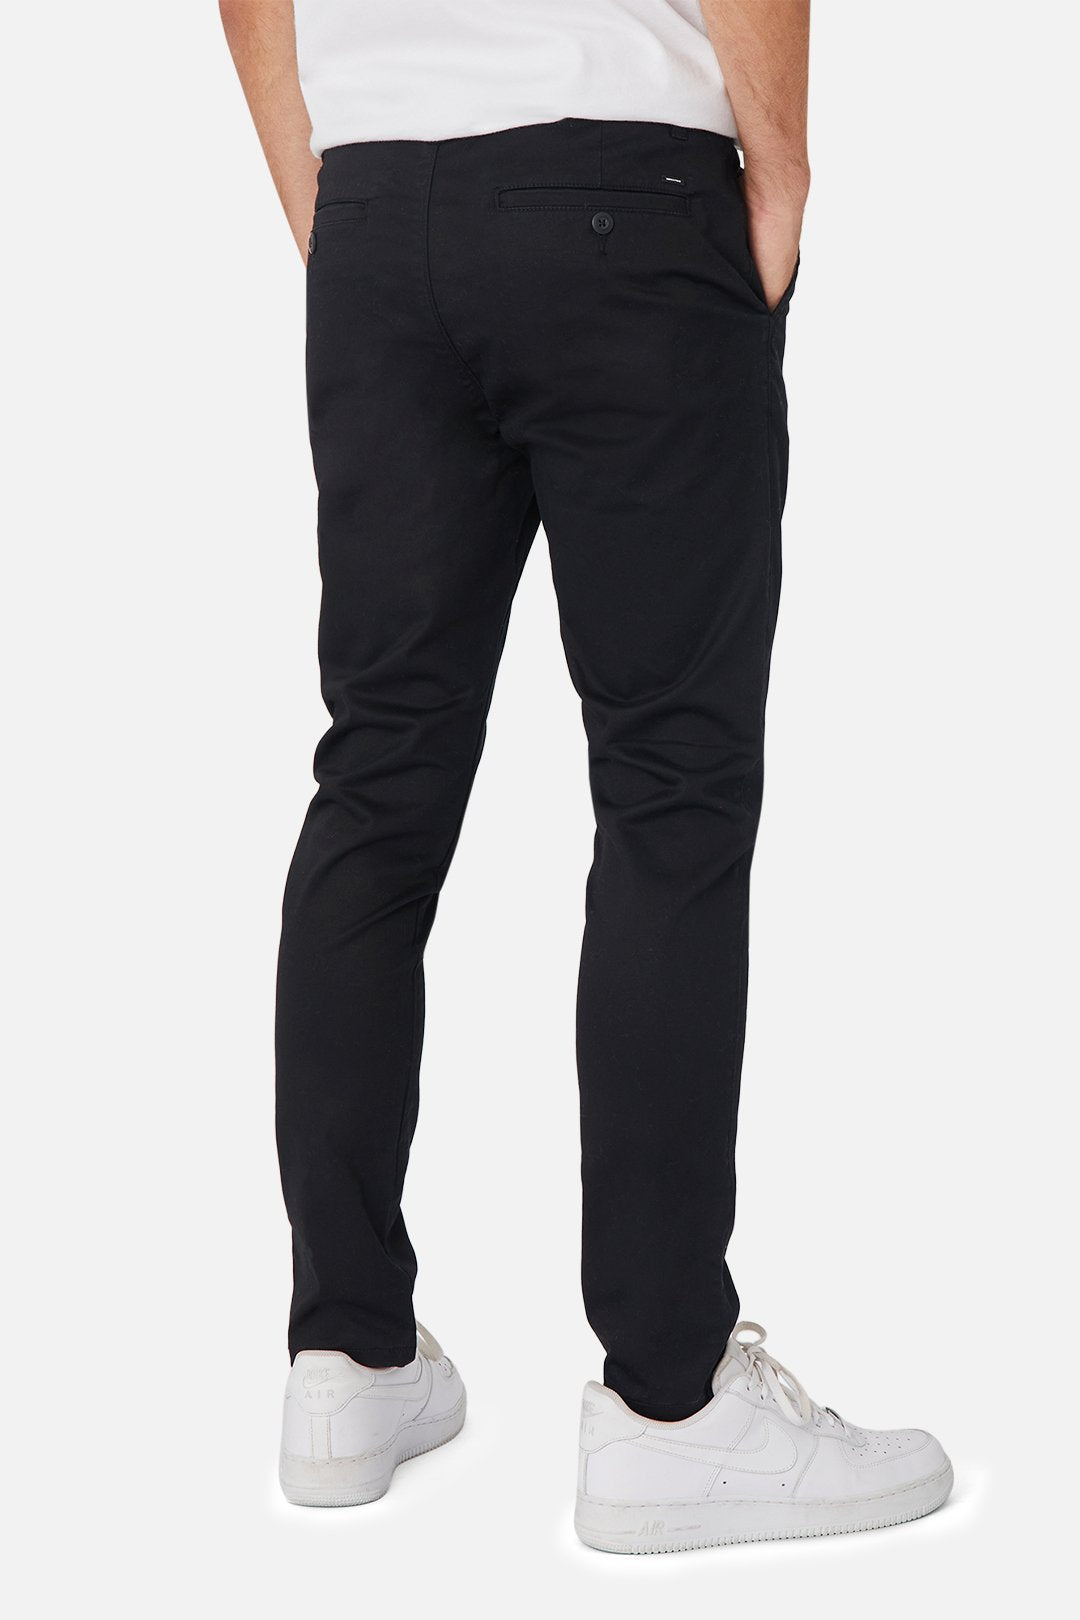 INDUSTRIE THE CUBA CHINO PANT BLACK